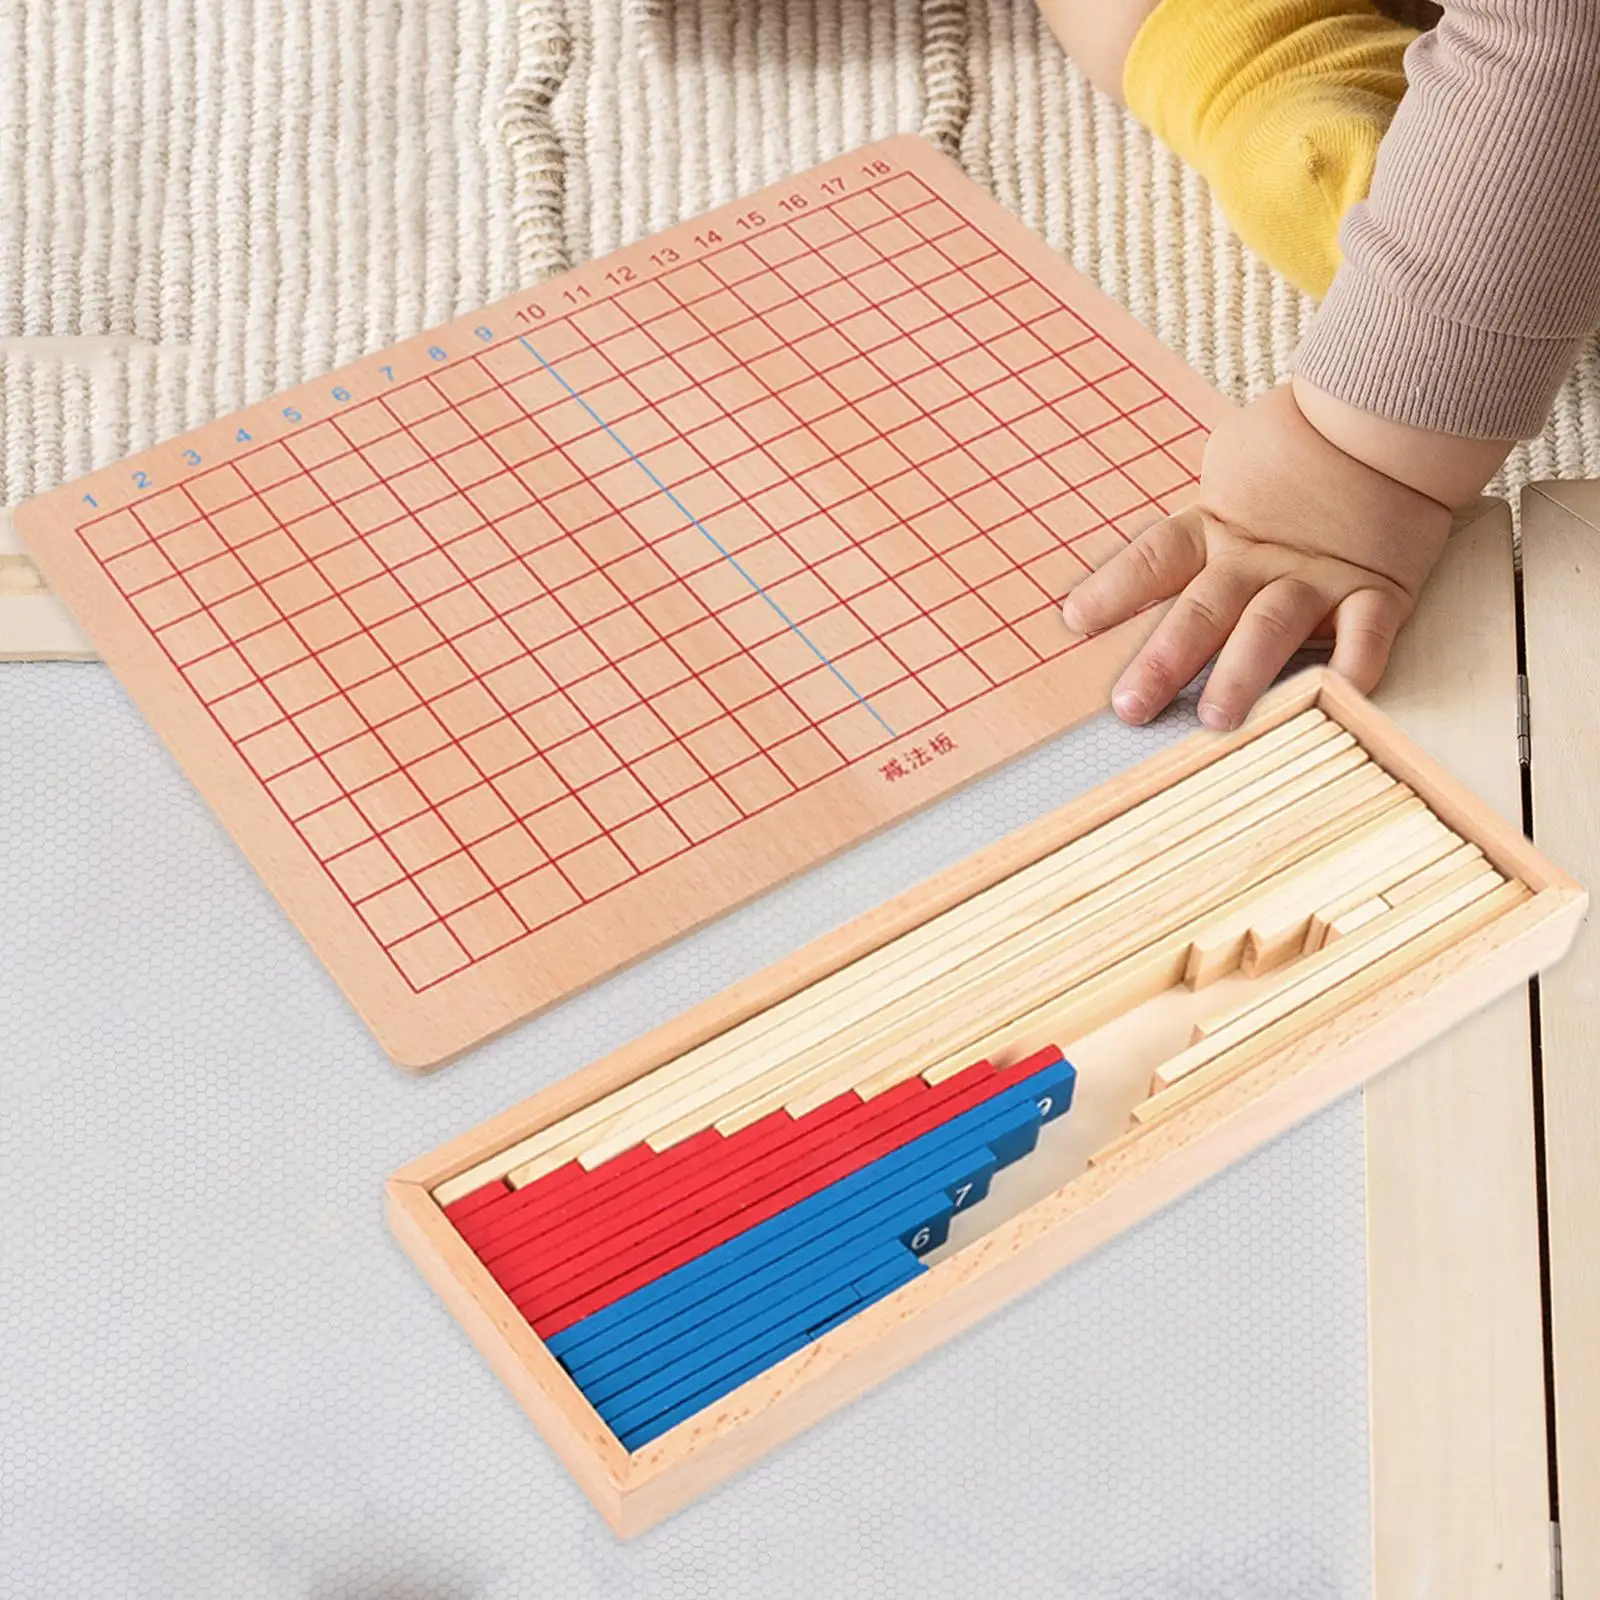 Addition Subtraction Strip Board Learning Mathematics Logical Sensory Toys Development Teaching Aids Wooden Subtraction Board